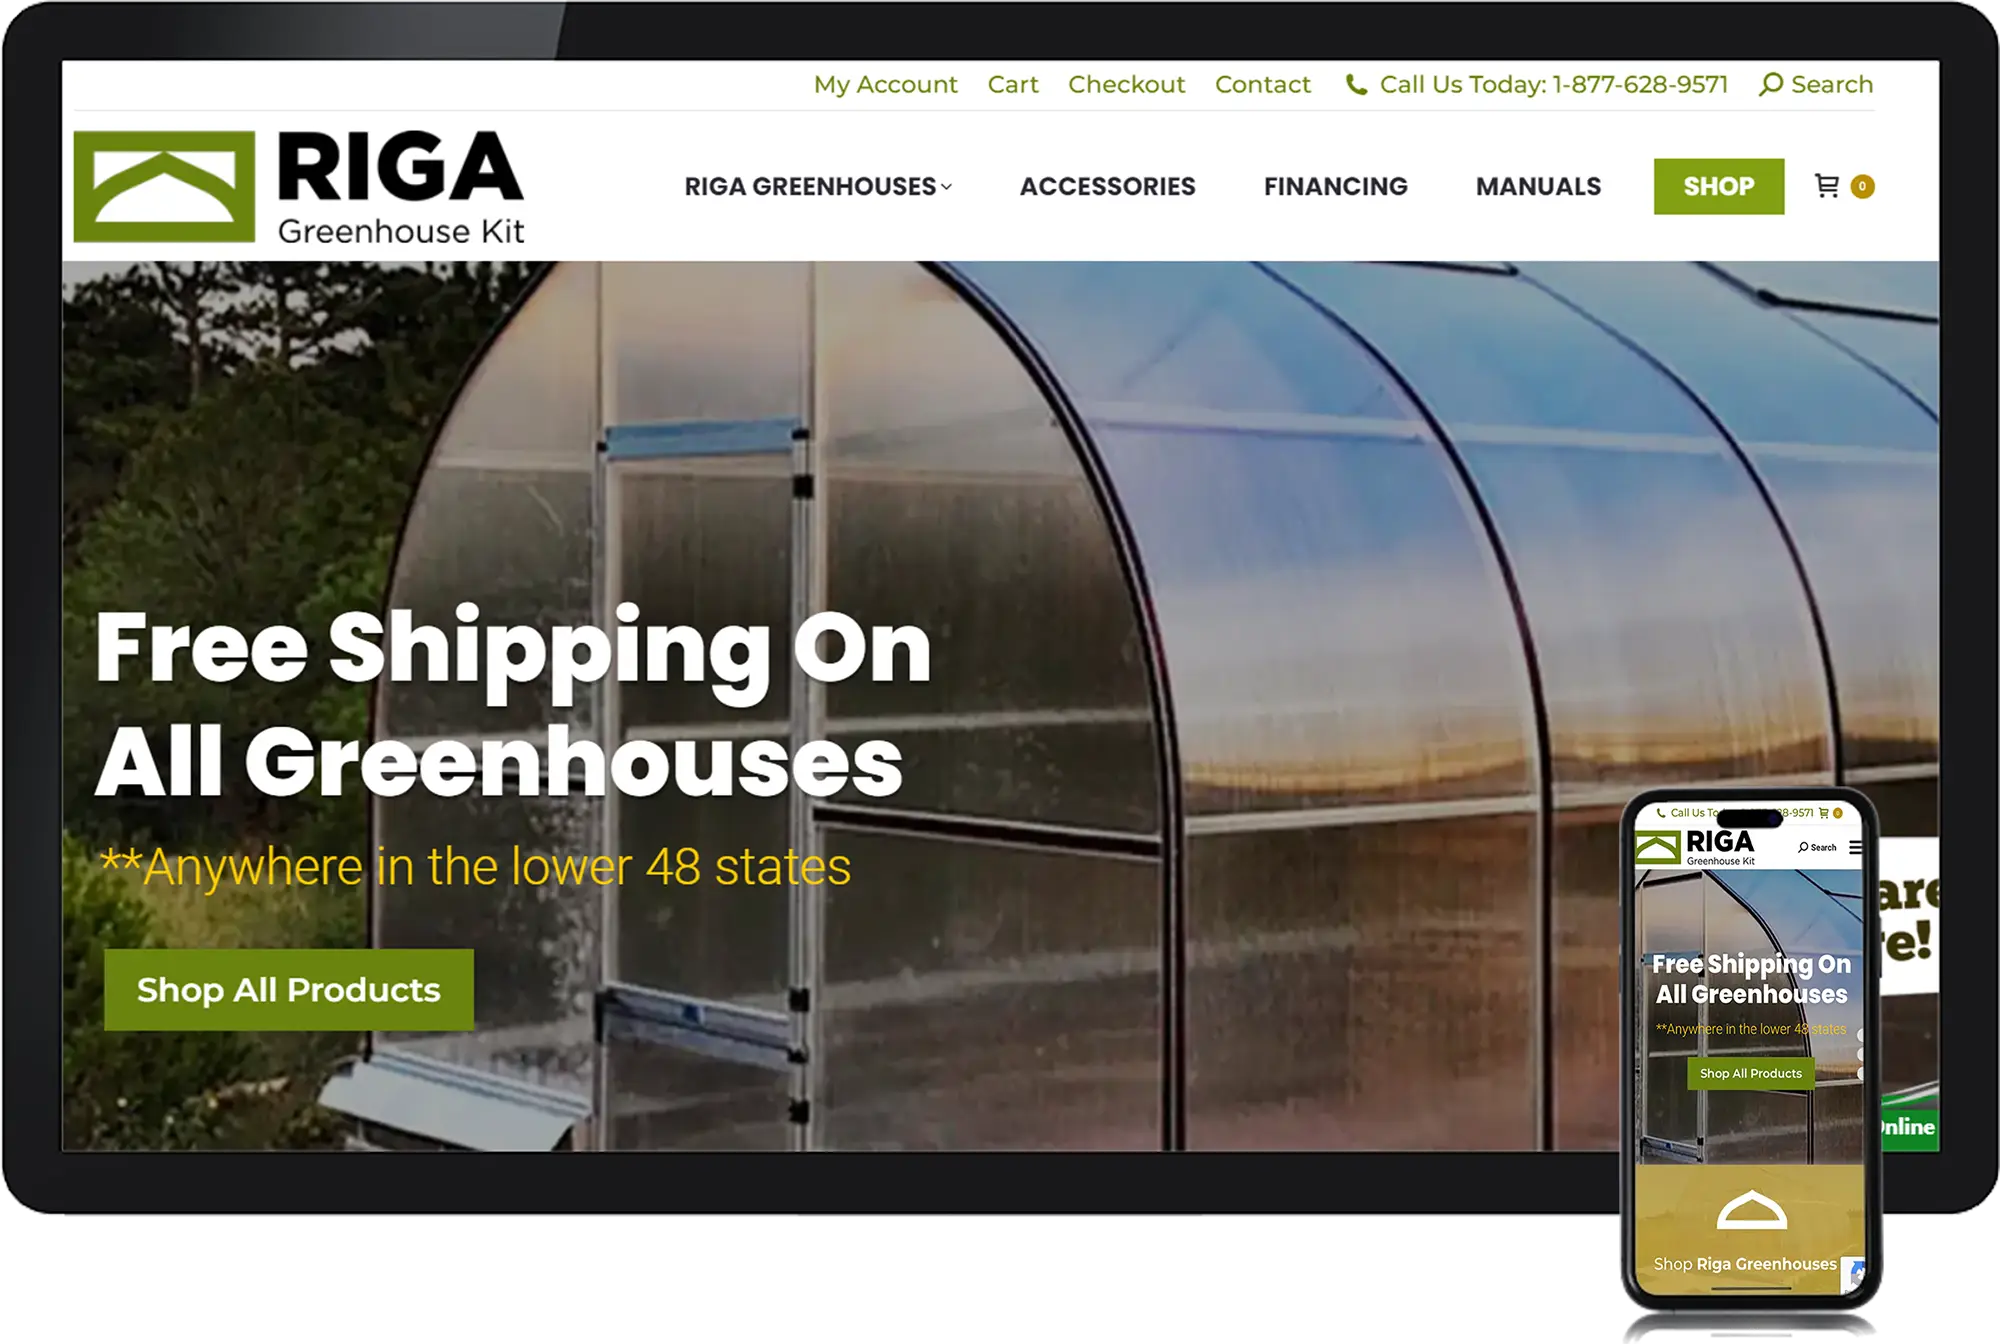 greenhouses sold throughout the United States